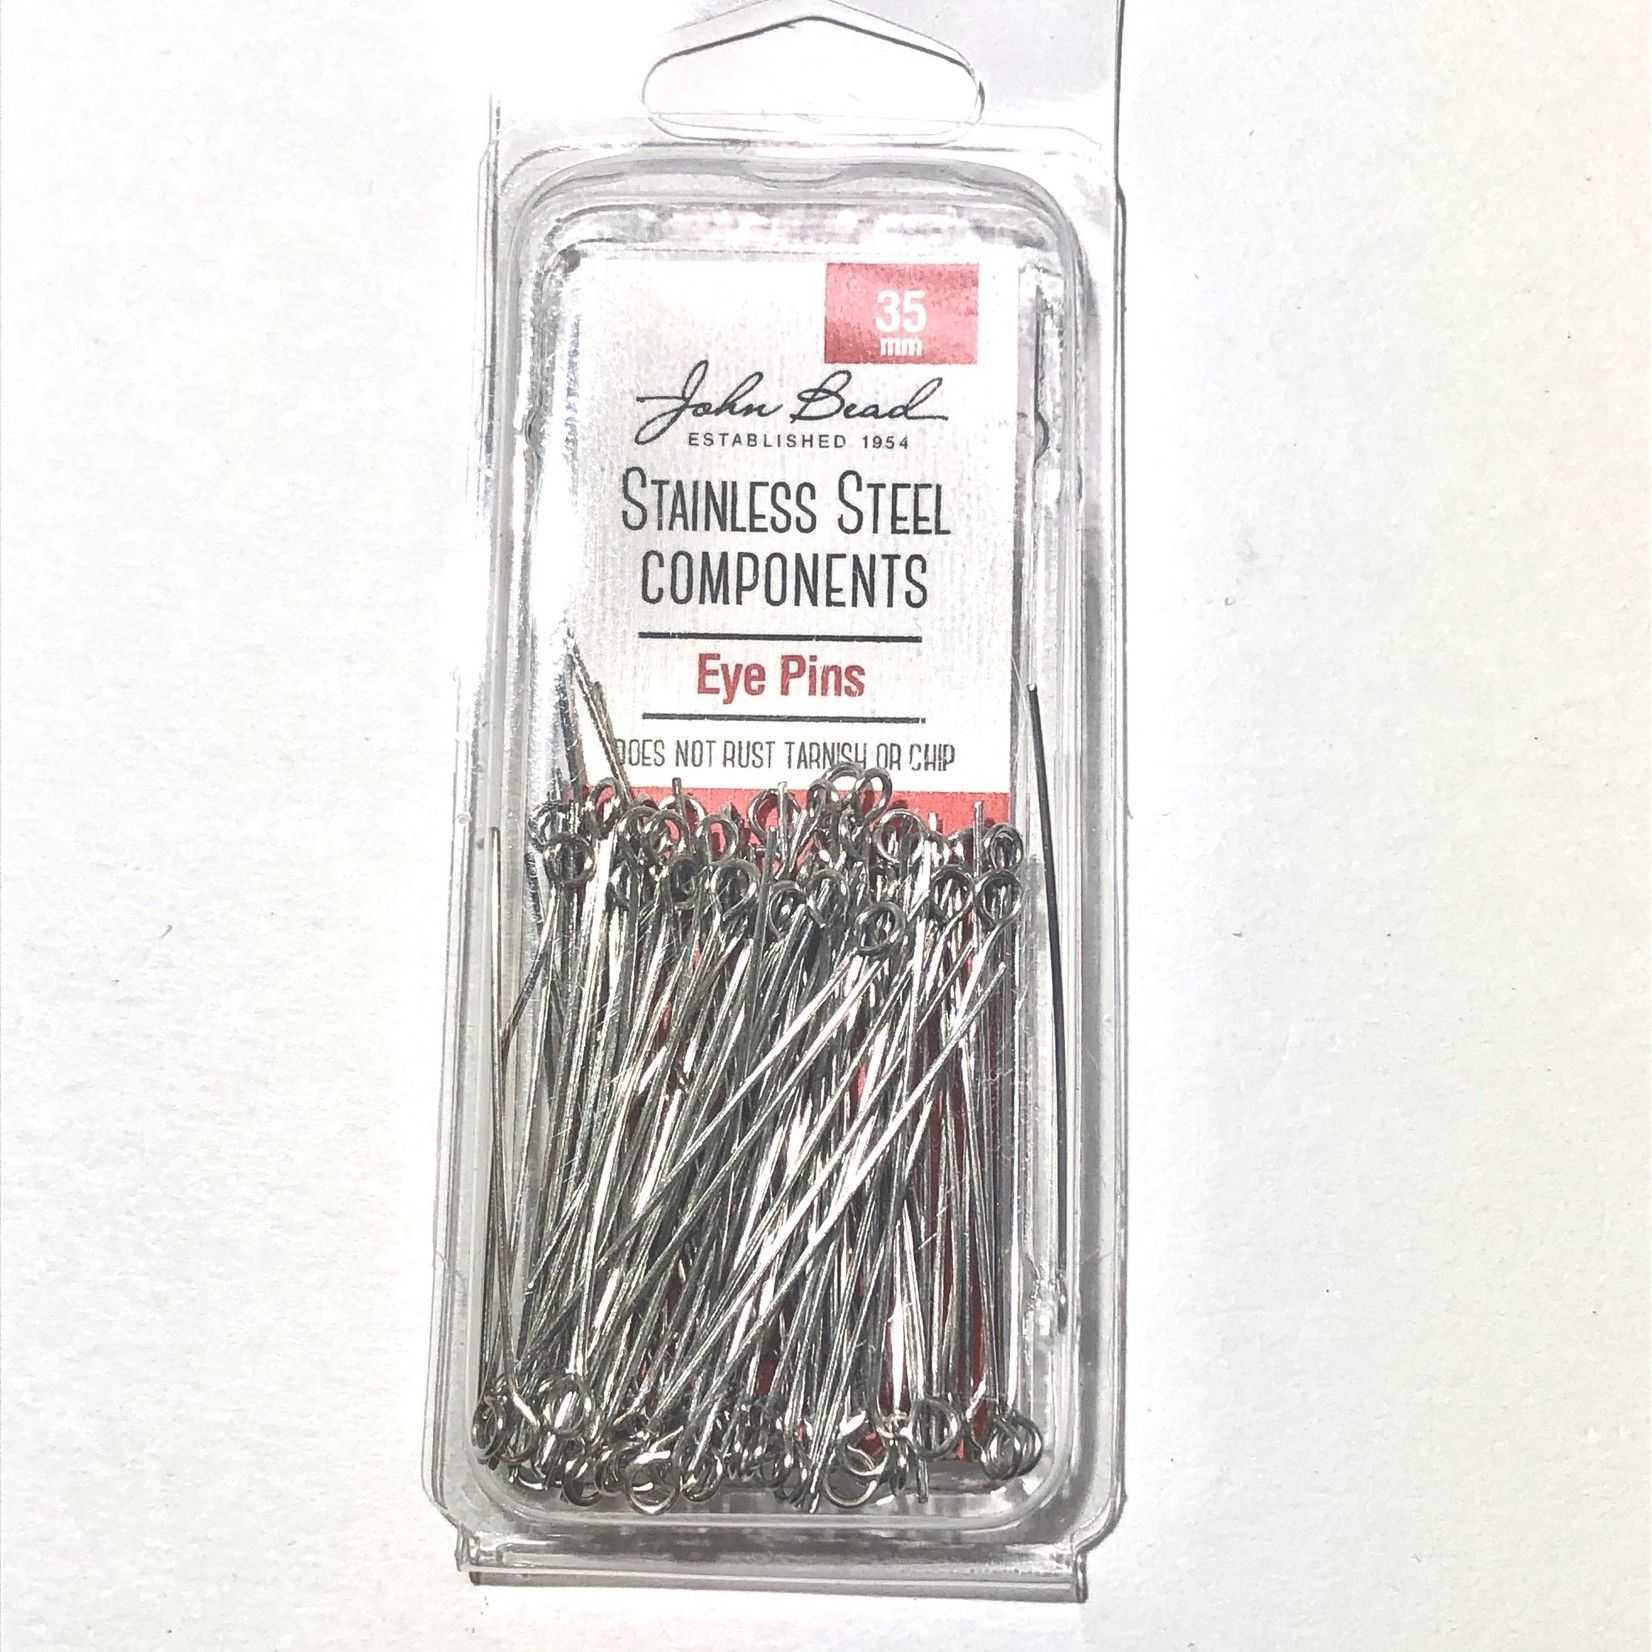 Stainless Steel Eye Pins 35mm 100pcs